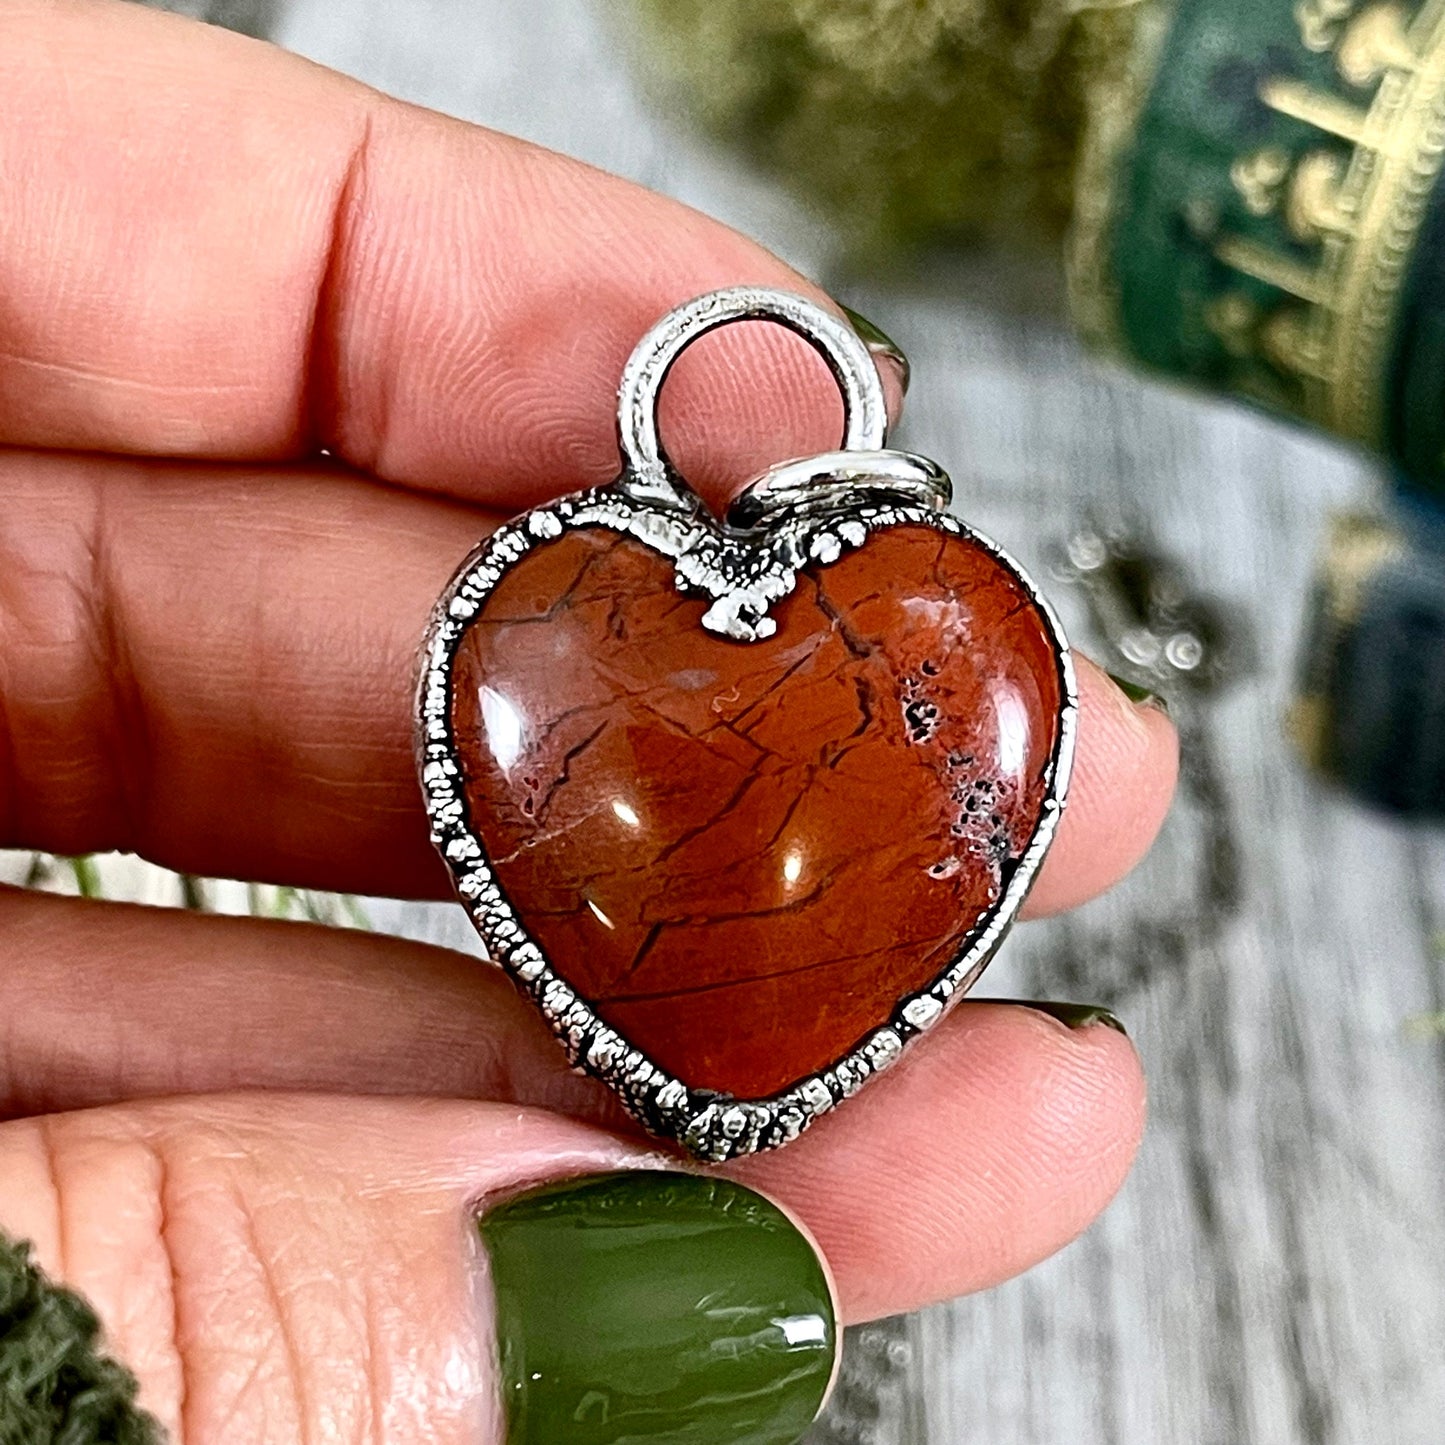 Red Jasper Crystal Heart Necklace in Fine Silver / Stone Pendant / Gift for Her Heart Shaped Necklace